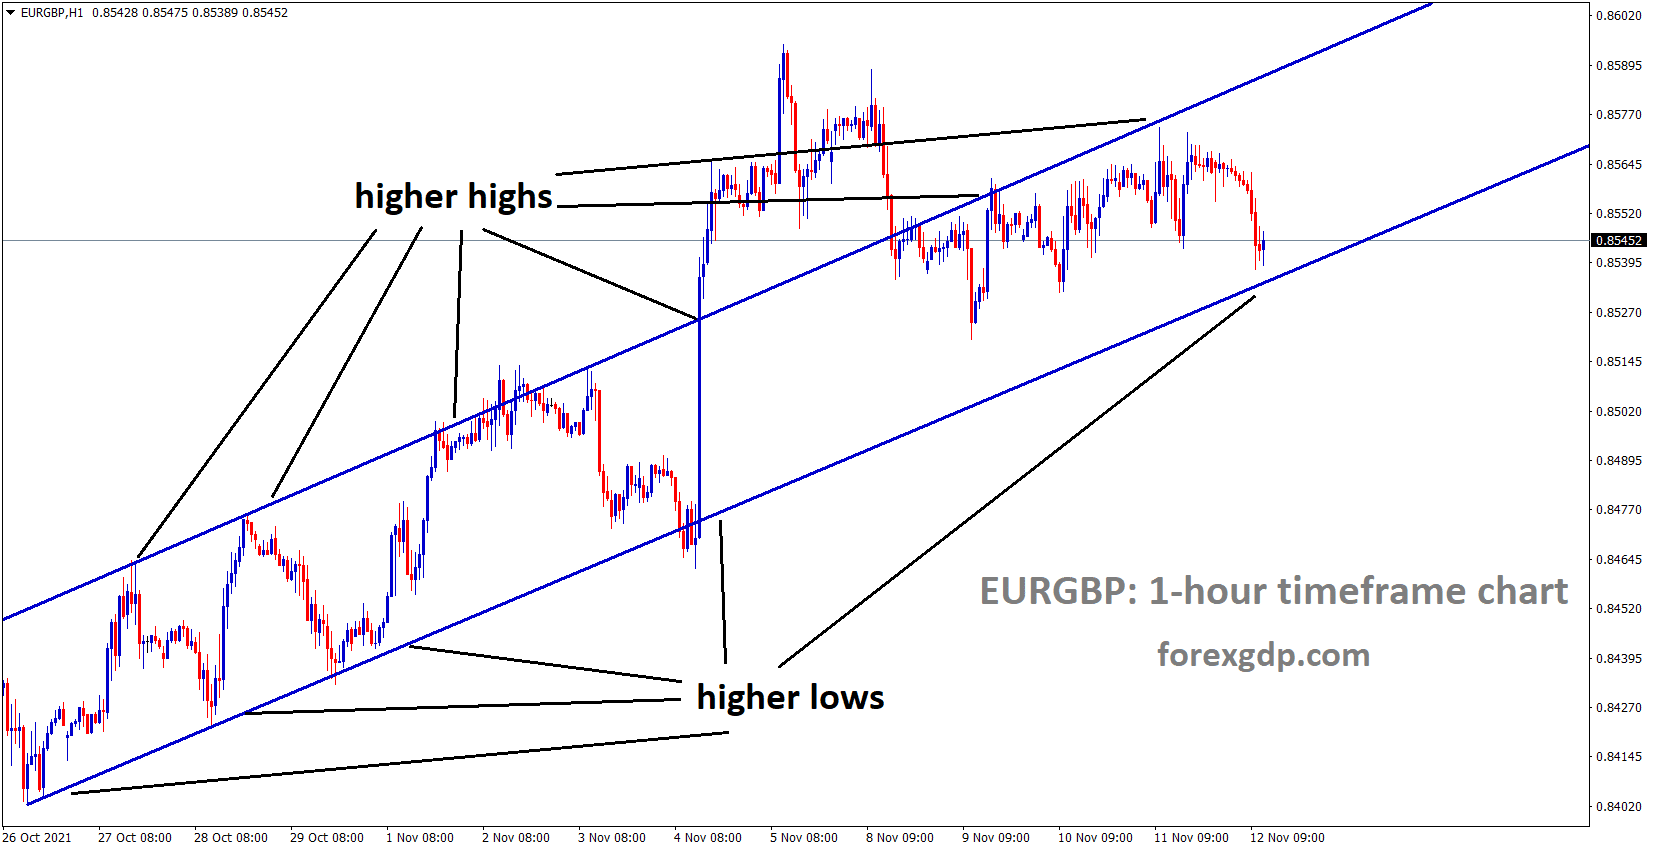 EURGBP is moving in an Ascending channel and the market reached the higher low area of the channel